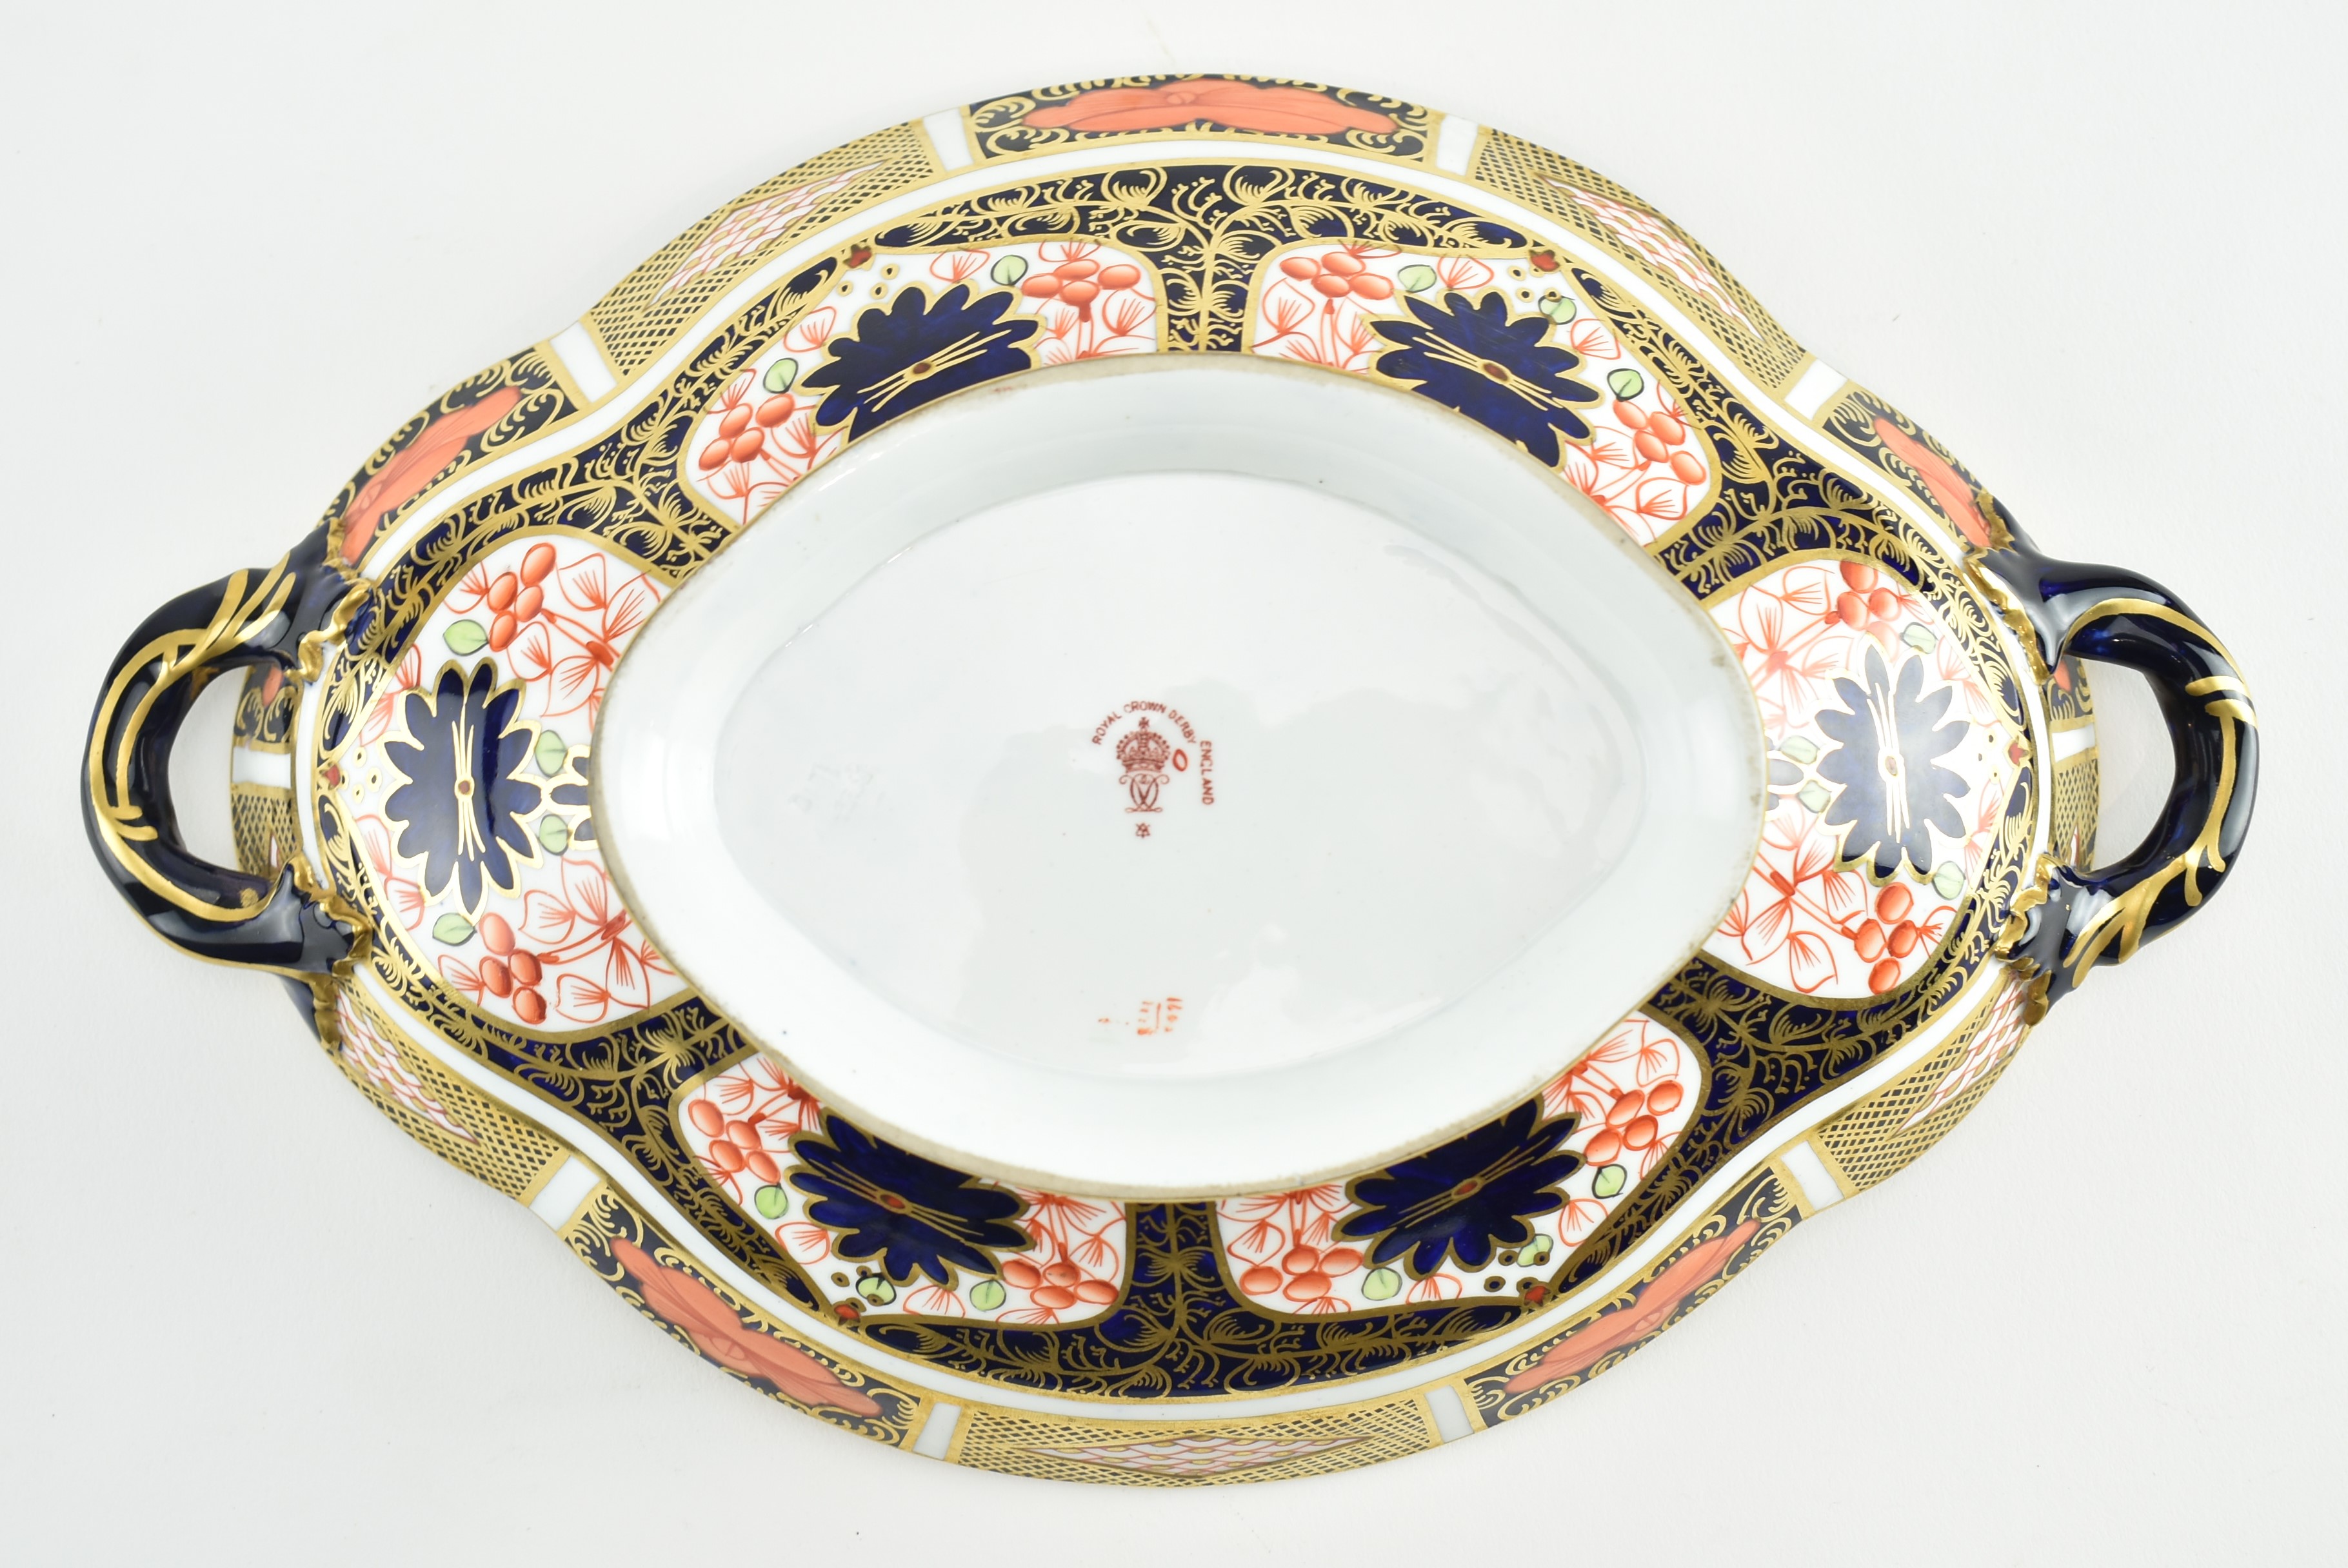 1920S ROYAL CROWN DERBY OLD IMARI DESSERT DISH WITH HANDLES - Image 5 of 6